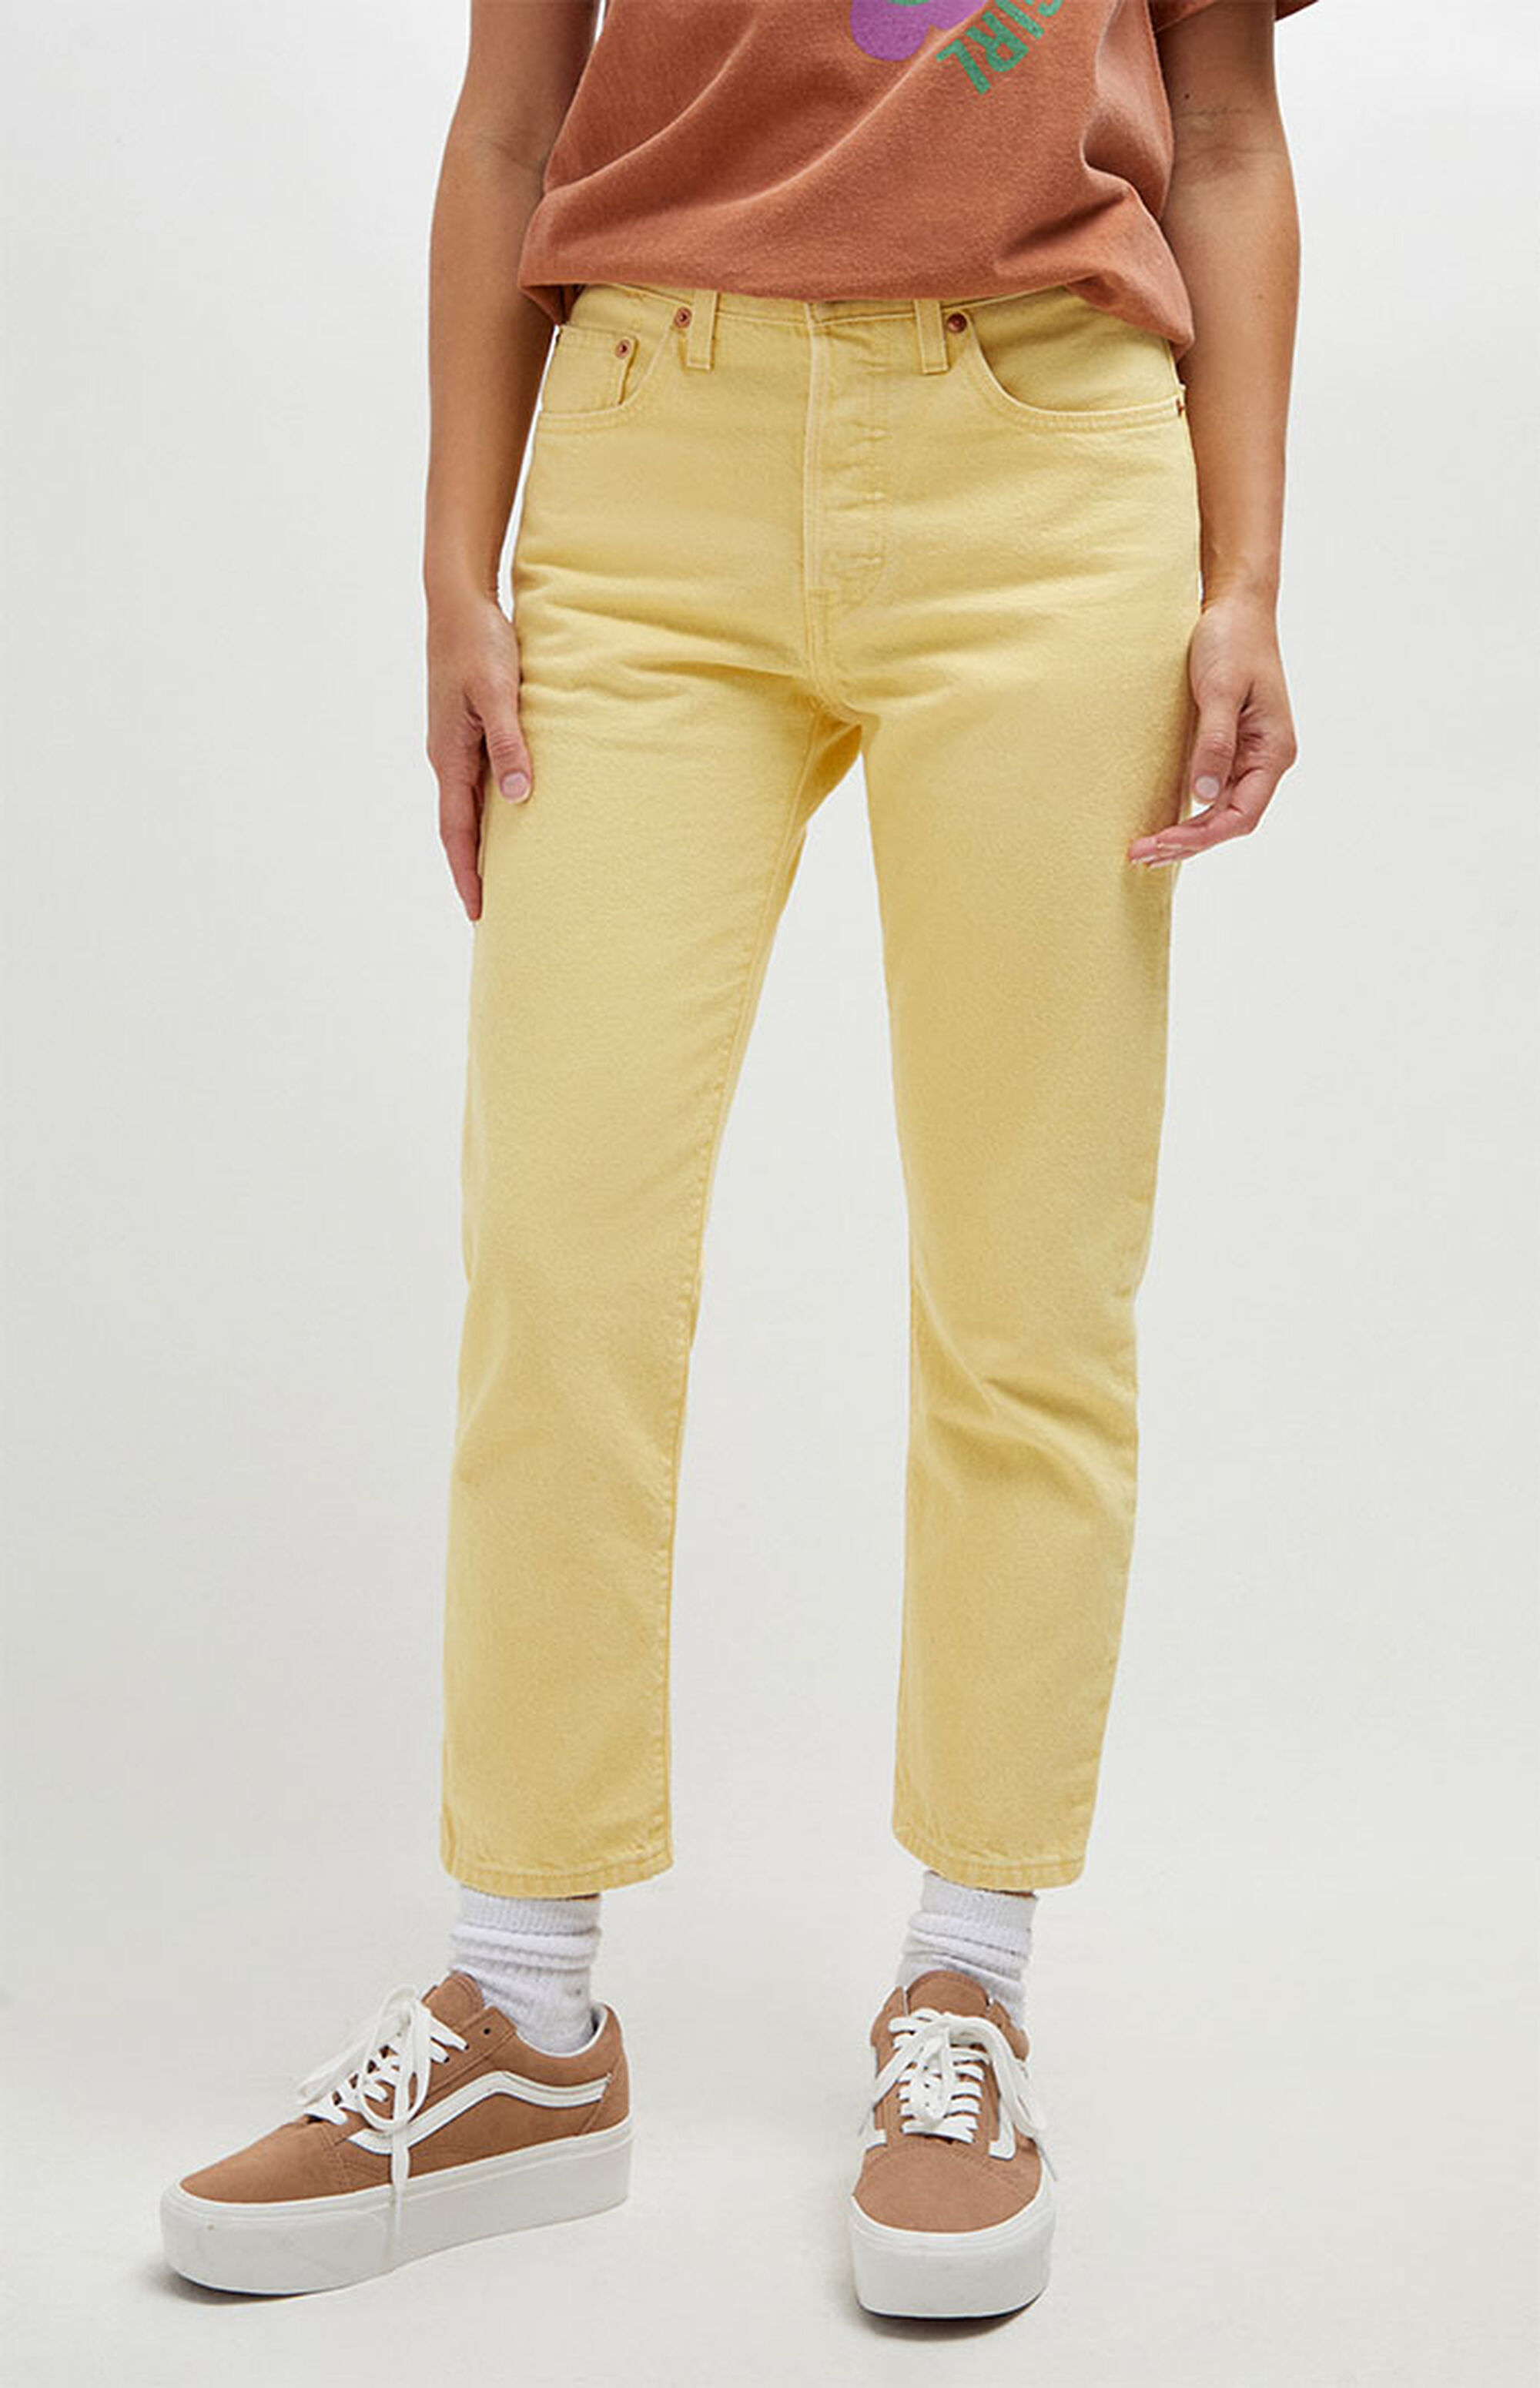 Levi's 501 Botanical Yellow Cropped Jeans | PacSun